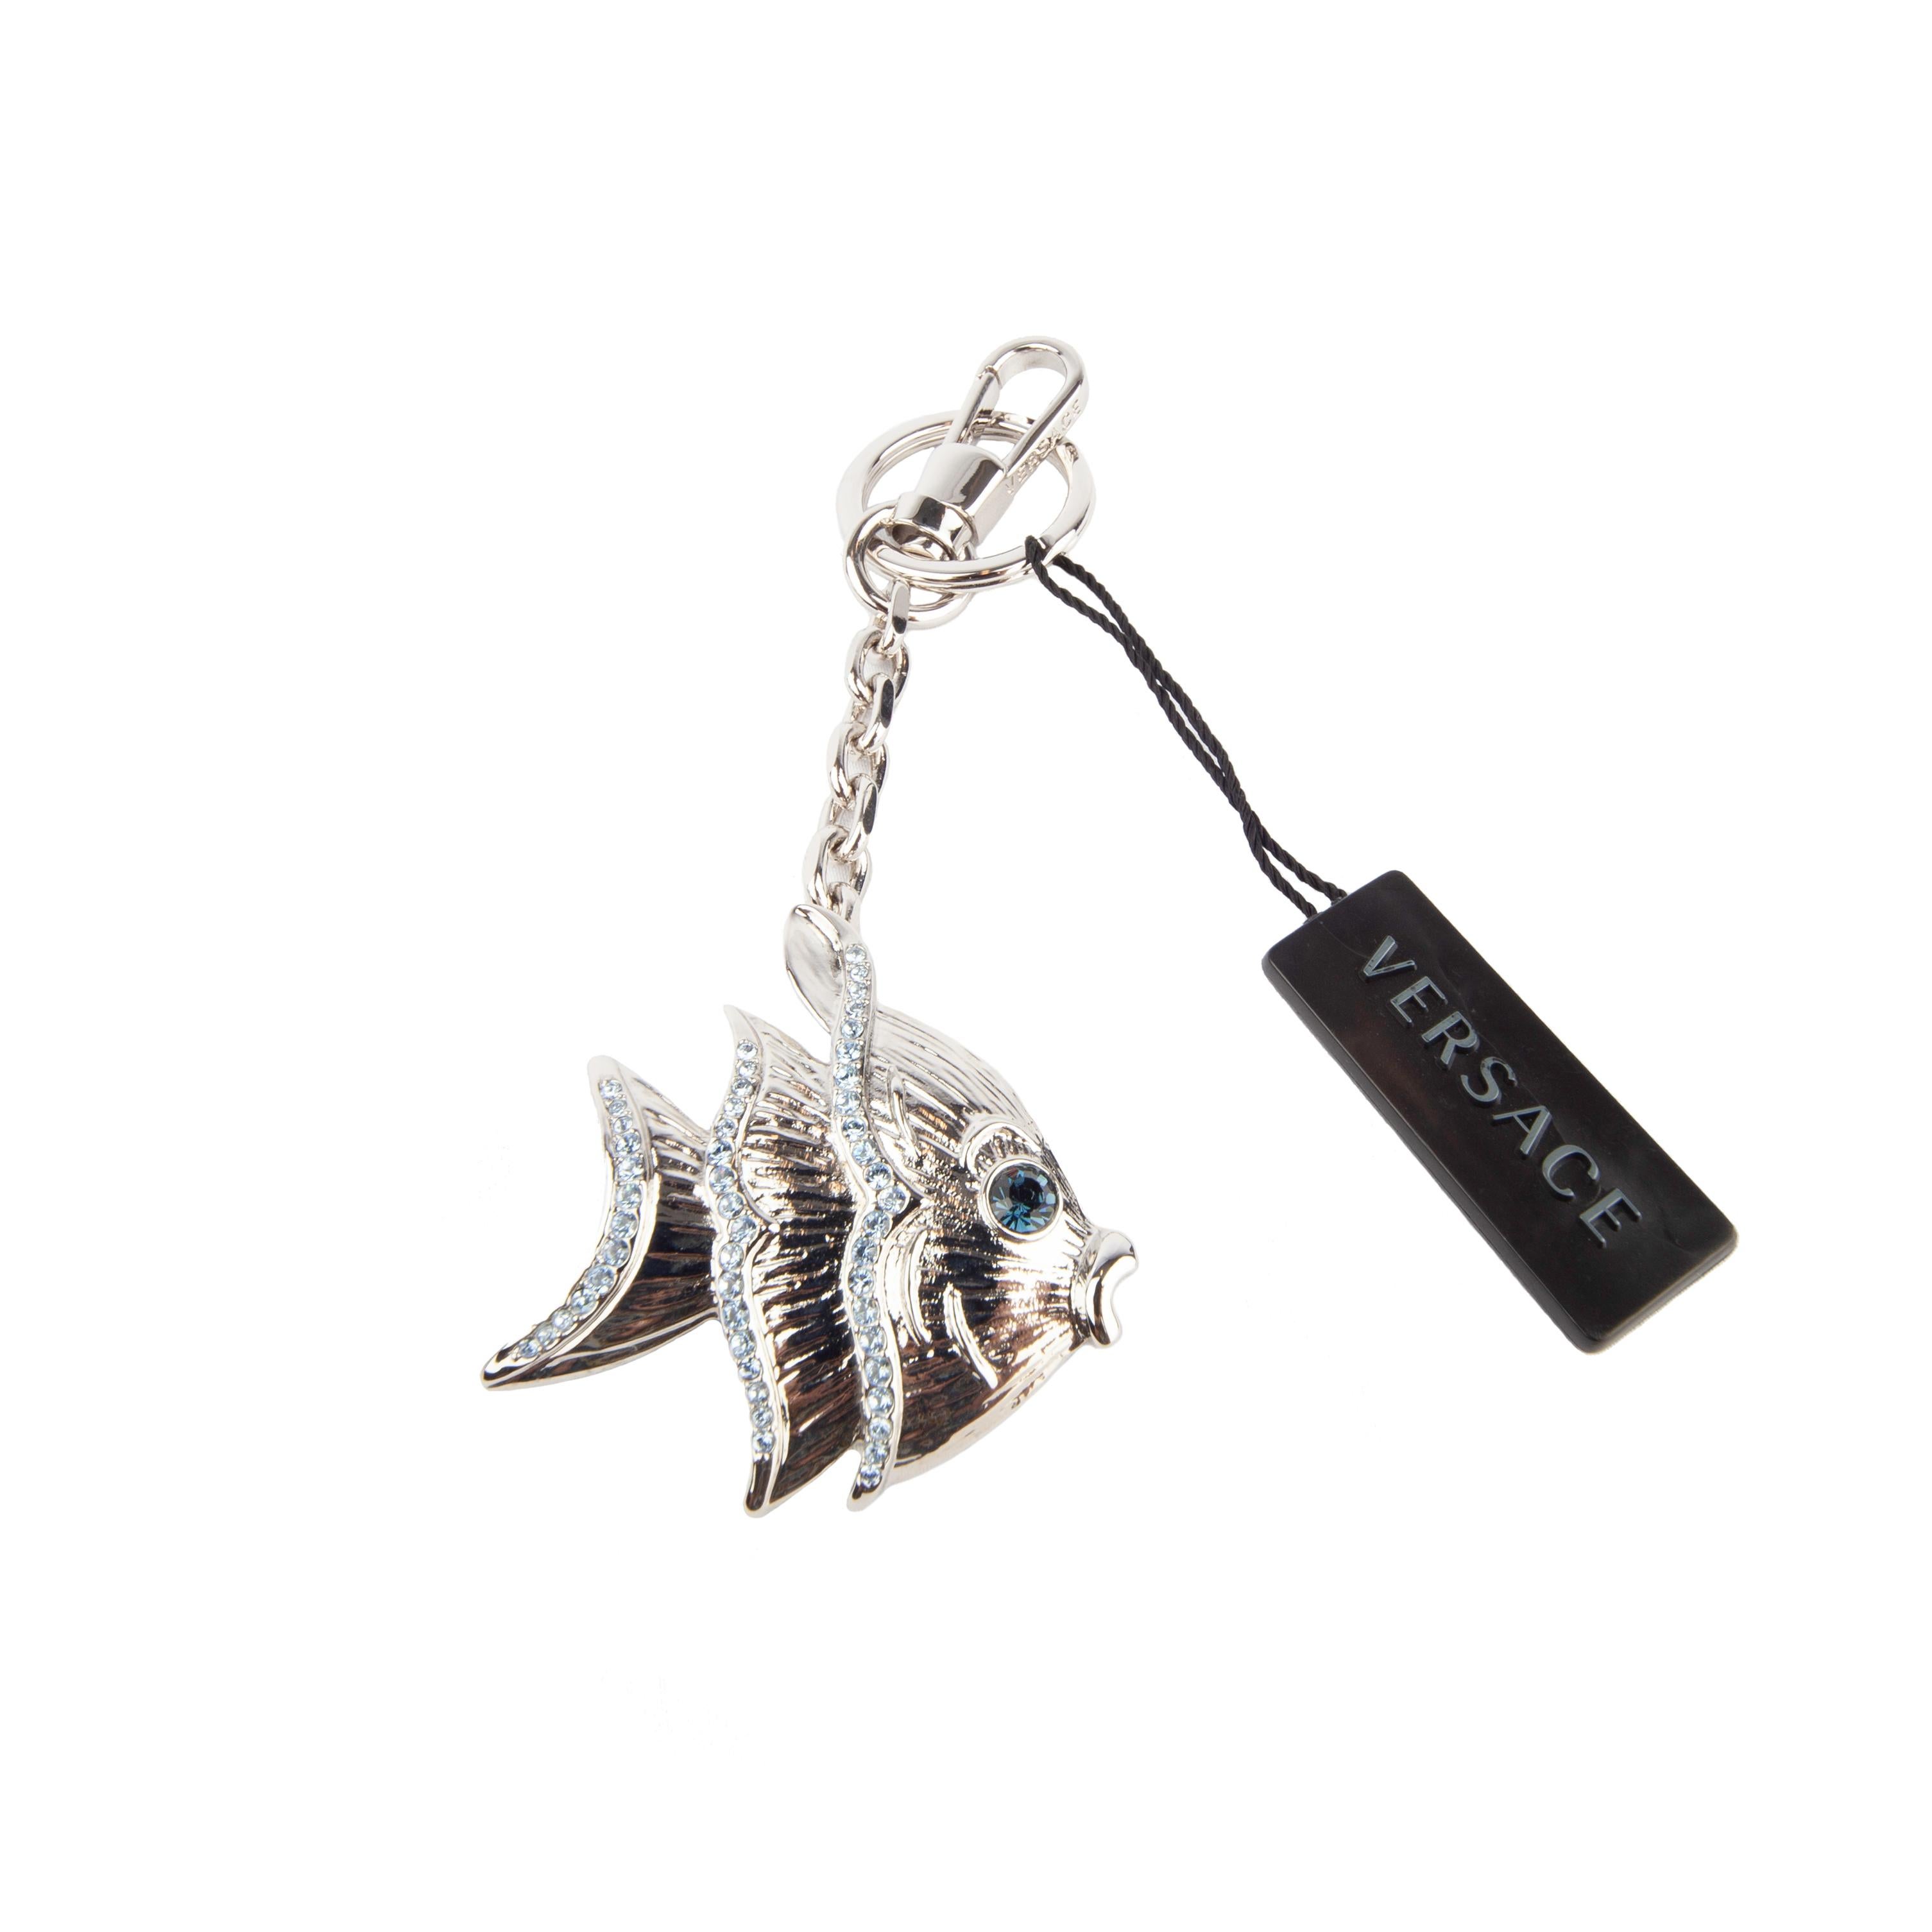 Versace Angel Fish Metak Key Chain with blue rhinestones. Brand new with tags. Box included. Made in Italy.

Material: Stainless Steel